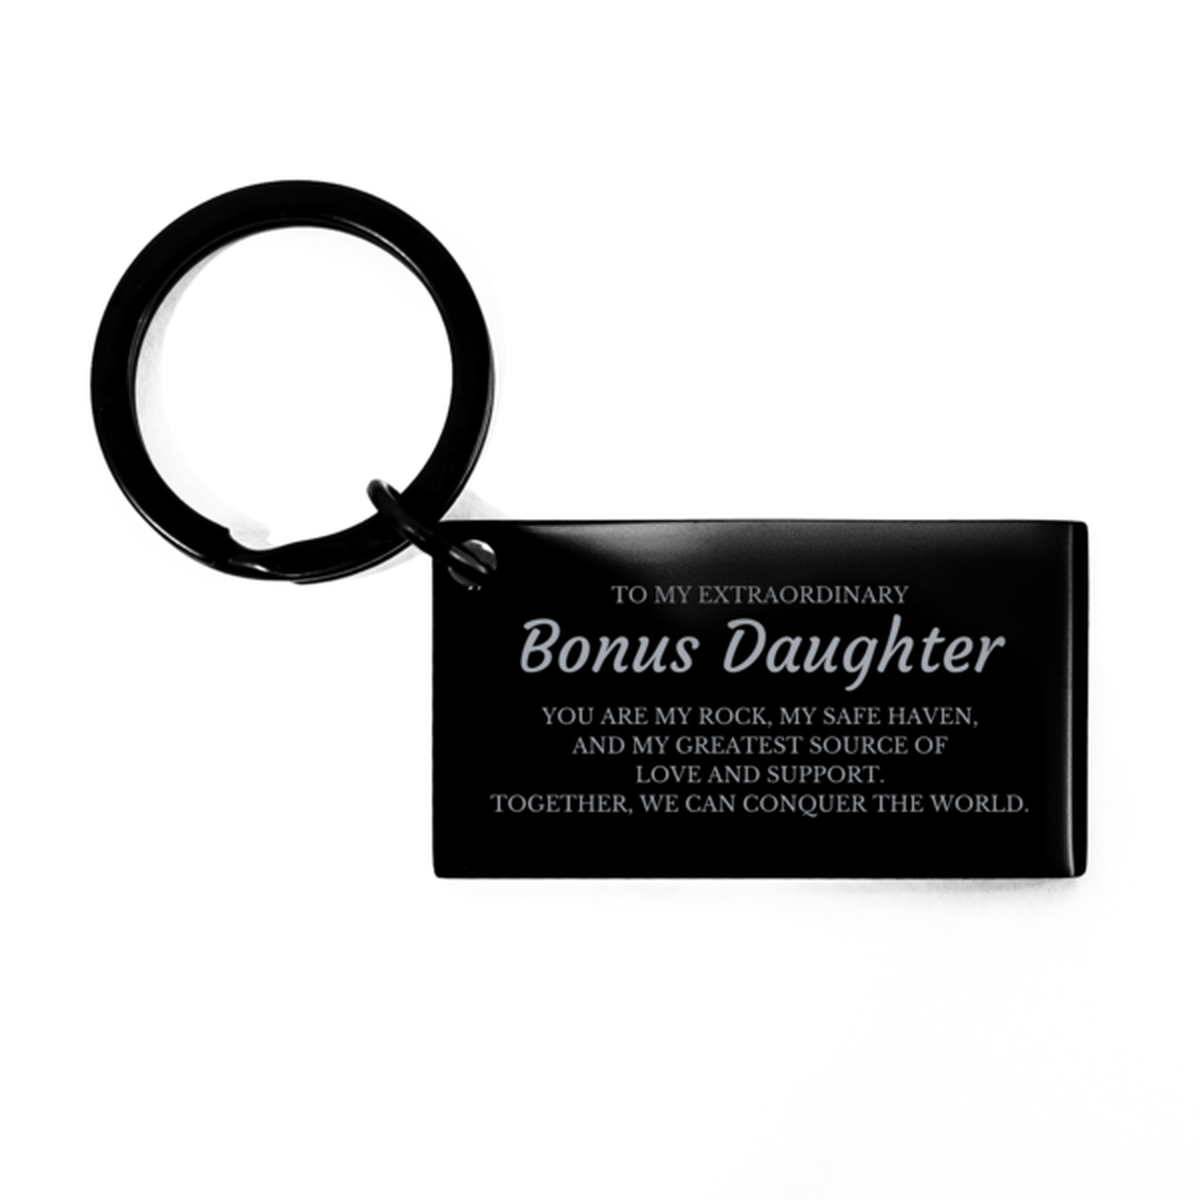 To My Extraordinary Bonus Daughter Gifts, Together, we can conquer the world, Birthday Keychain For Bonus Daughter, Christmas Gifts For Bonus Daughter